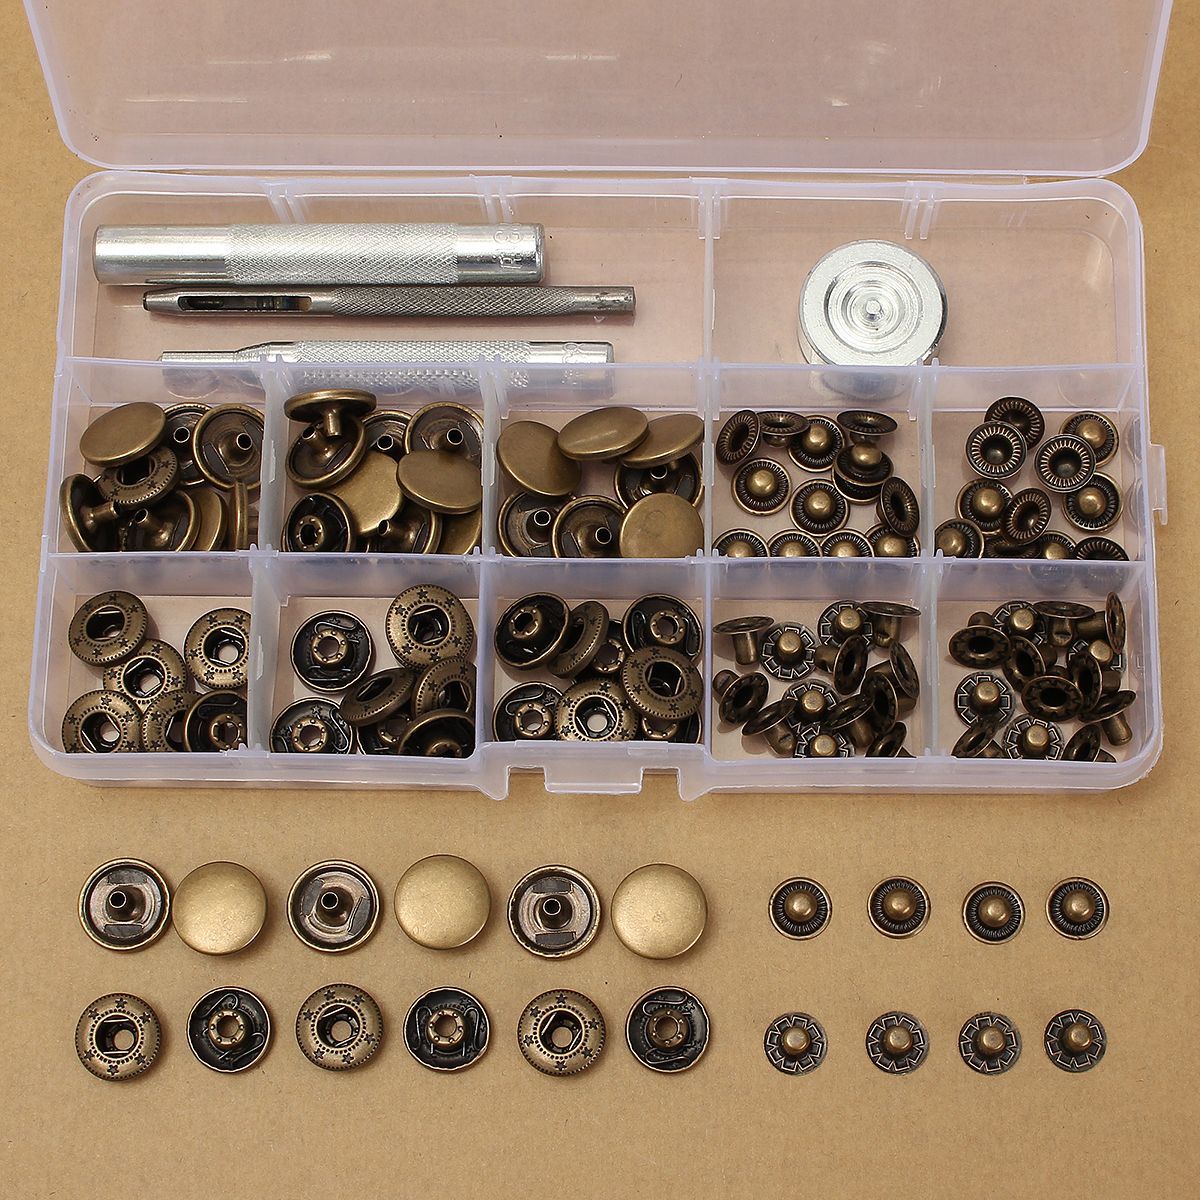 30Set-15mm-Antique-Brass-Snap-Fasteners-Popper-Press-Stud-Button-Leather-Tool-Kit-1253986